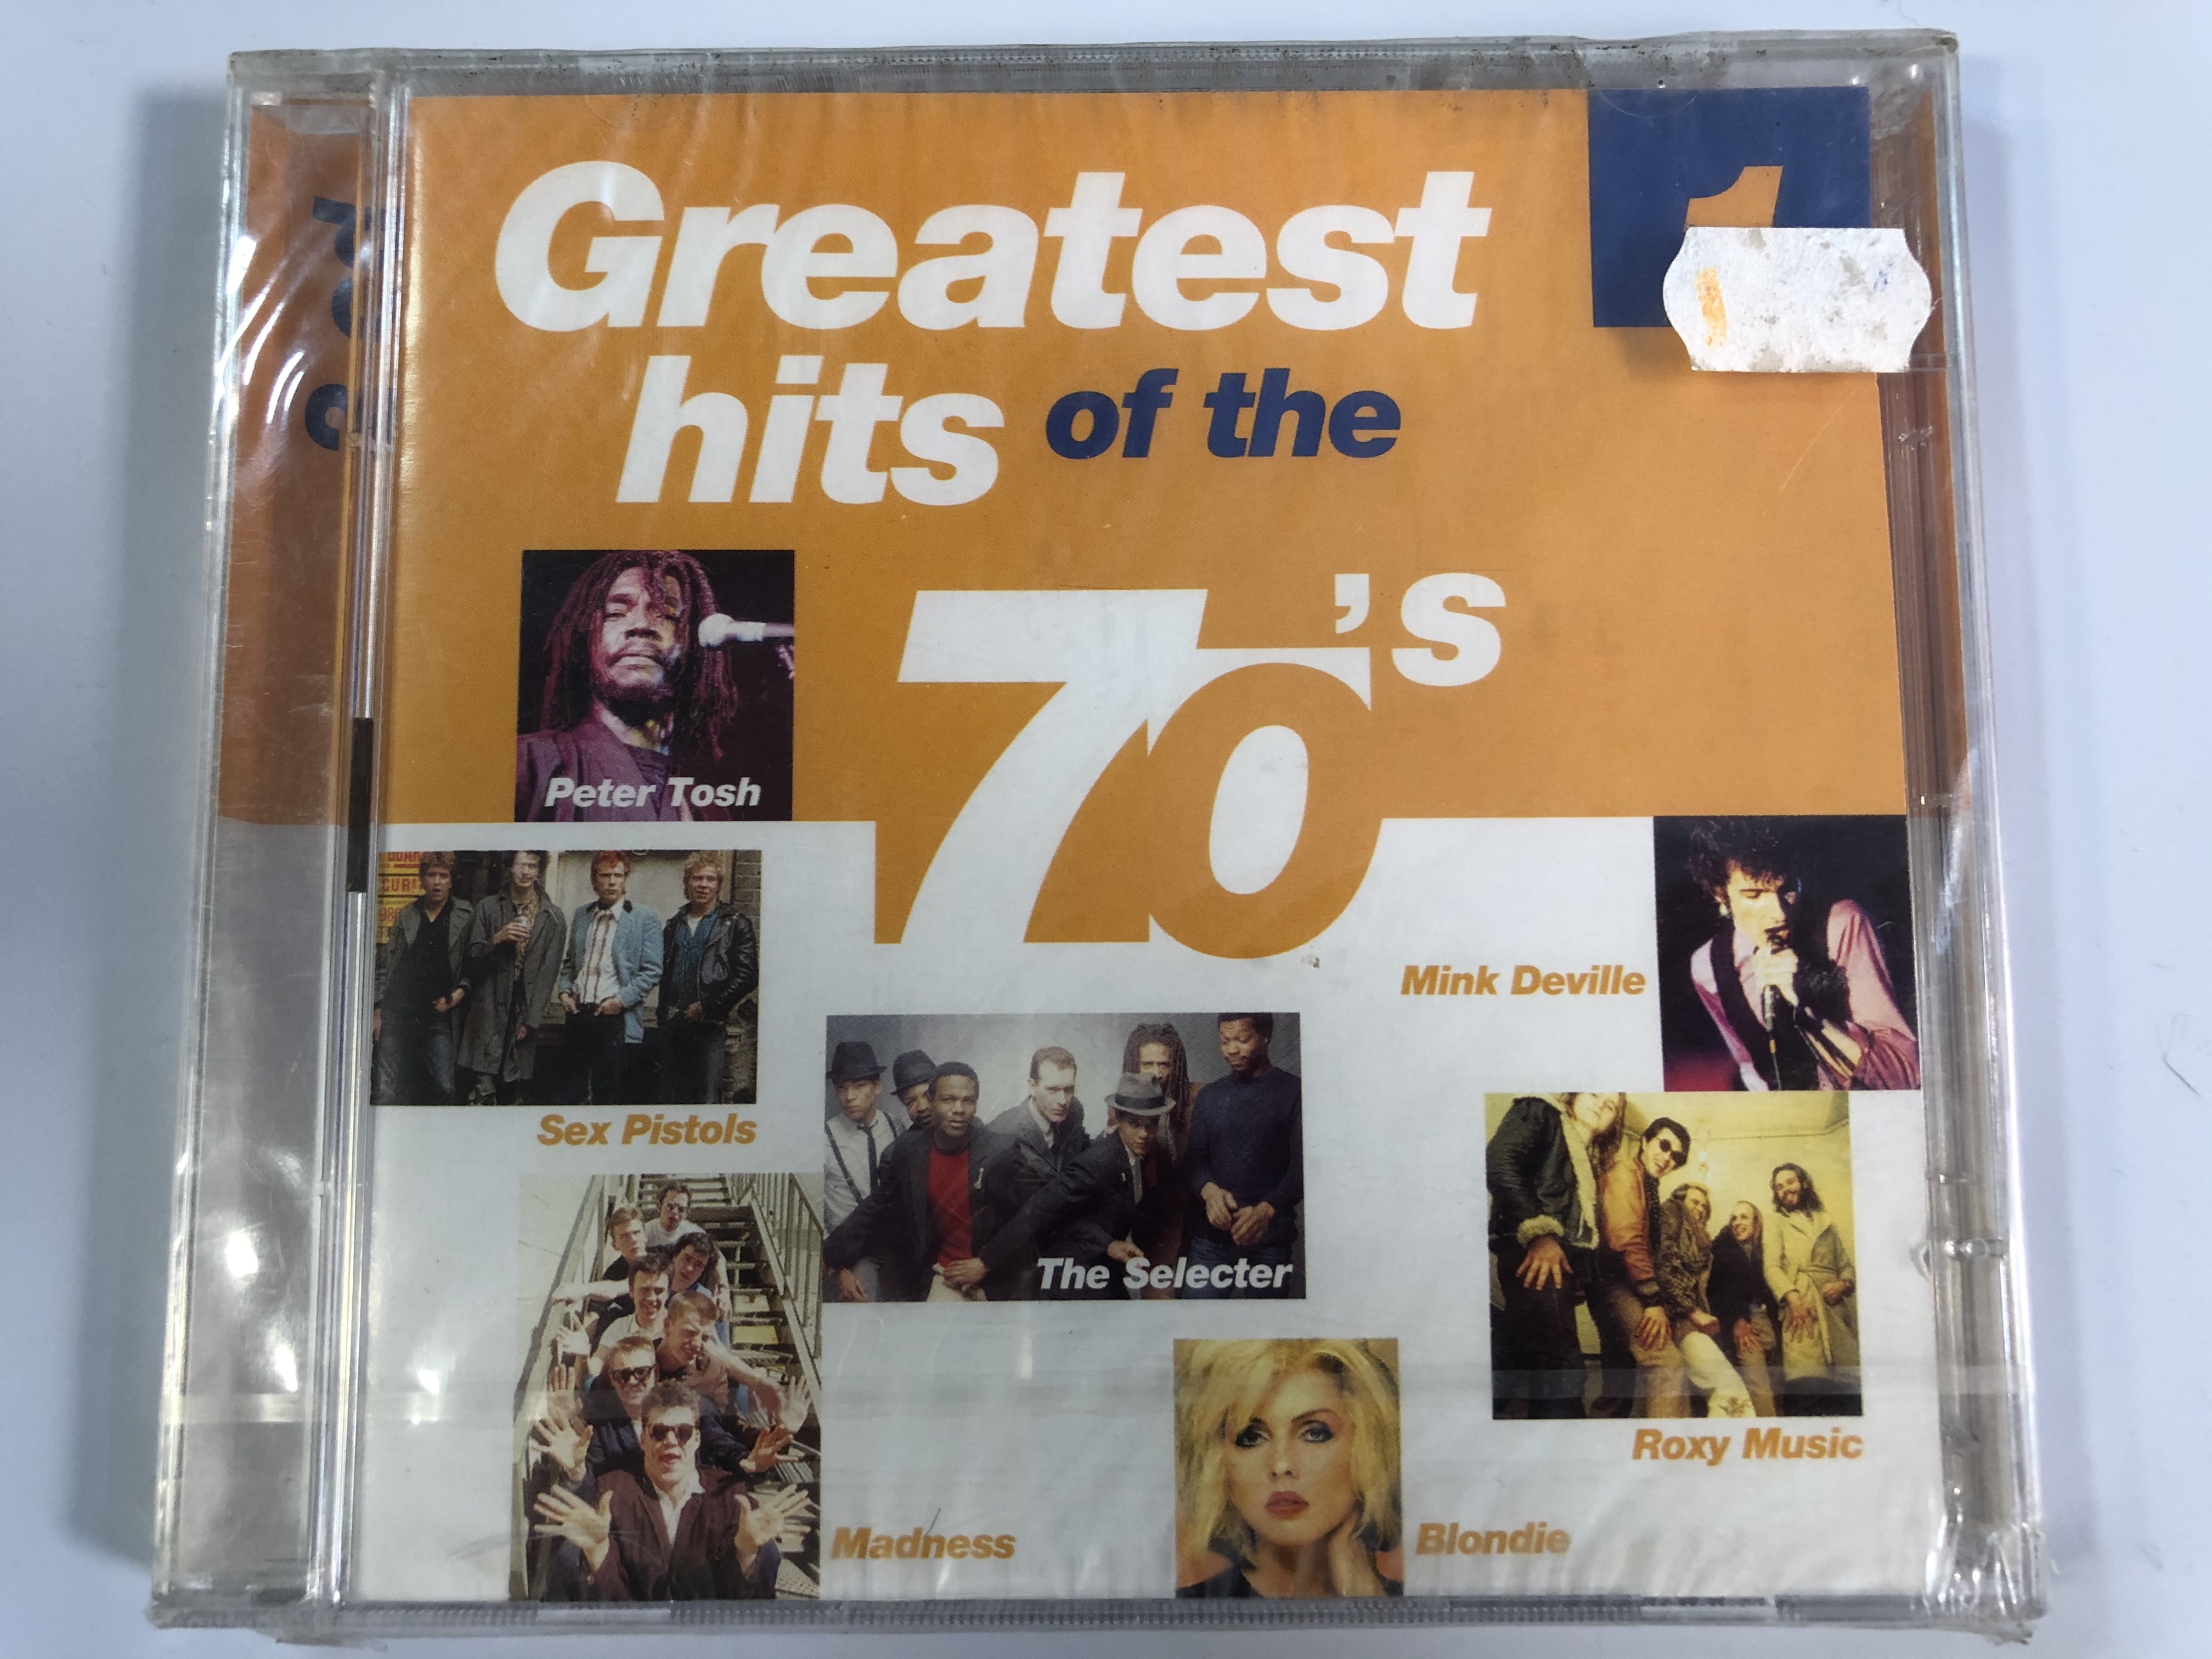 greatest-hits-of-the-70-s-1-peter-tosh-sex-pistols-madness-the-selecter-mink-deville-roxy-music-blondie-disky-2x-audio-cd-2000-do-991602-1-.jpg